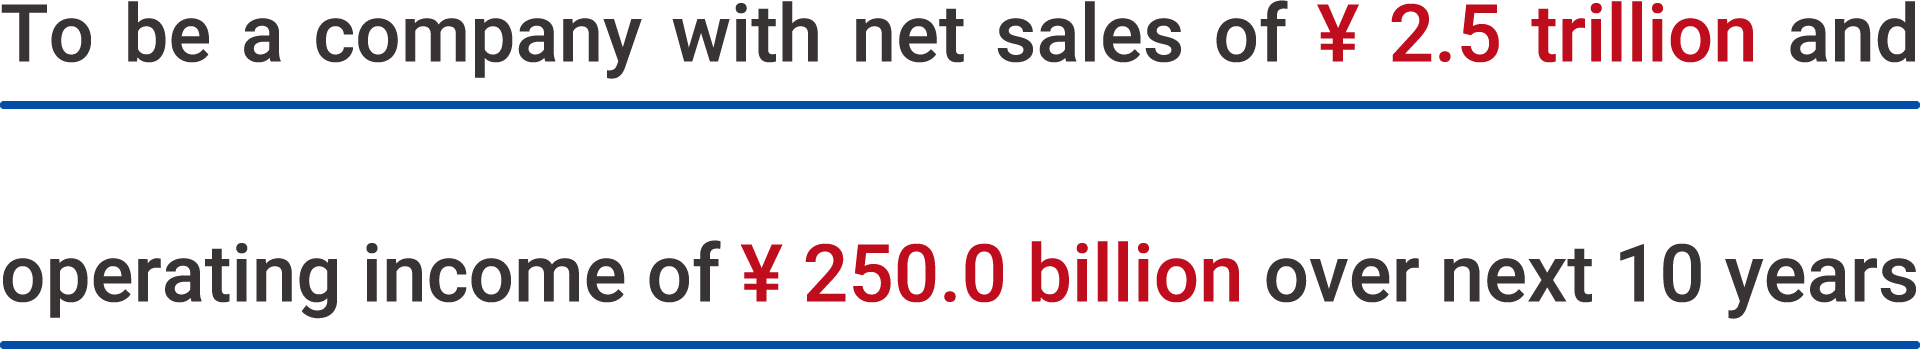 To be a company with net sales of ¥ 2.5 trillion and operating income of ¥ 250.0 billion over next 10 years